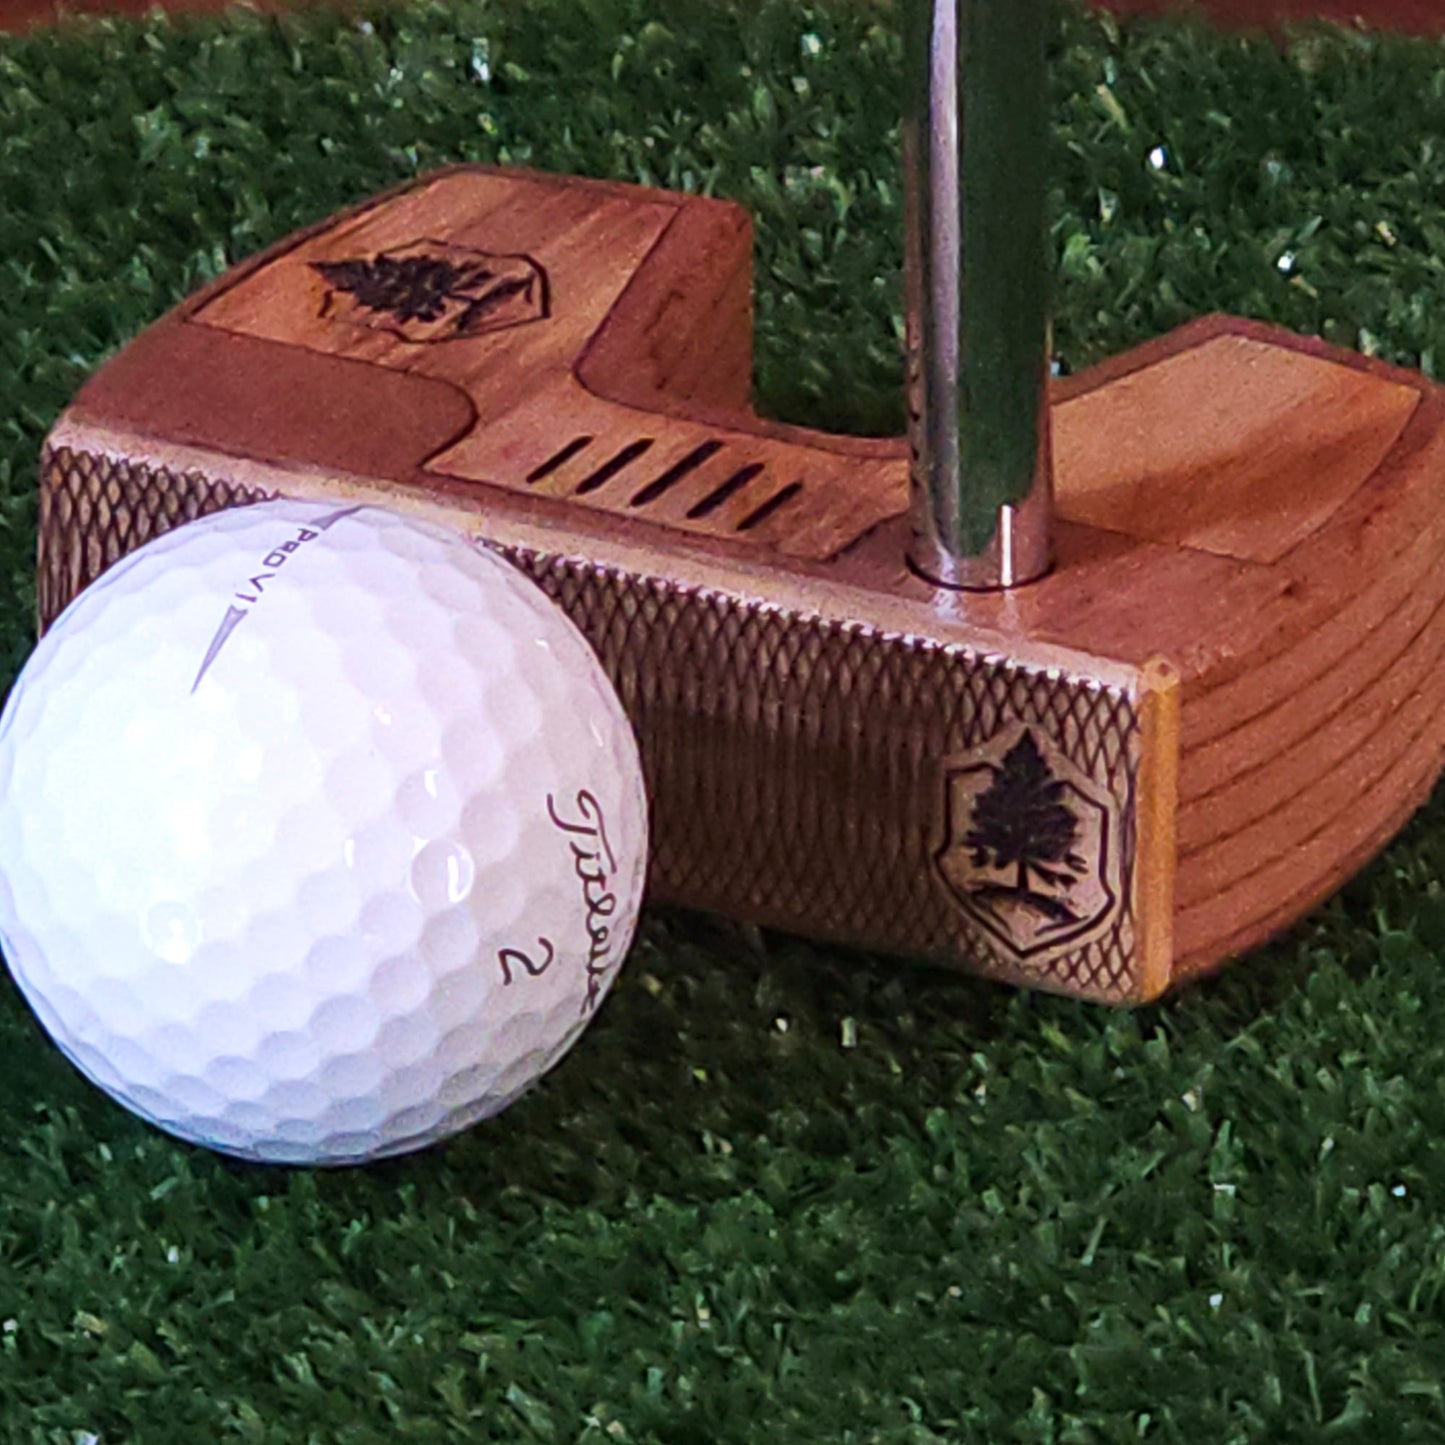 Canarywood and Mahogany Woodrich Regal wood putter